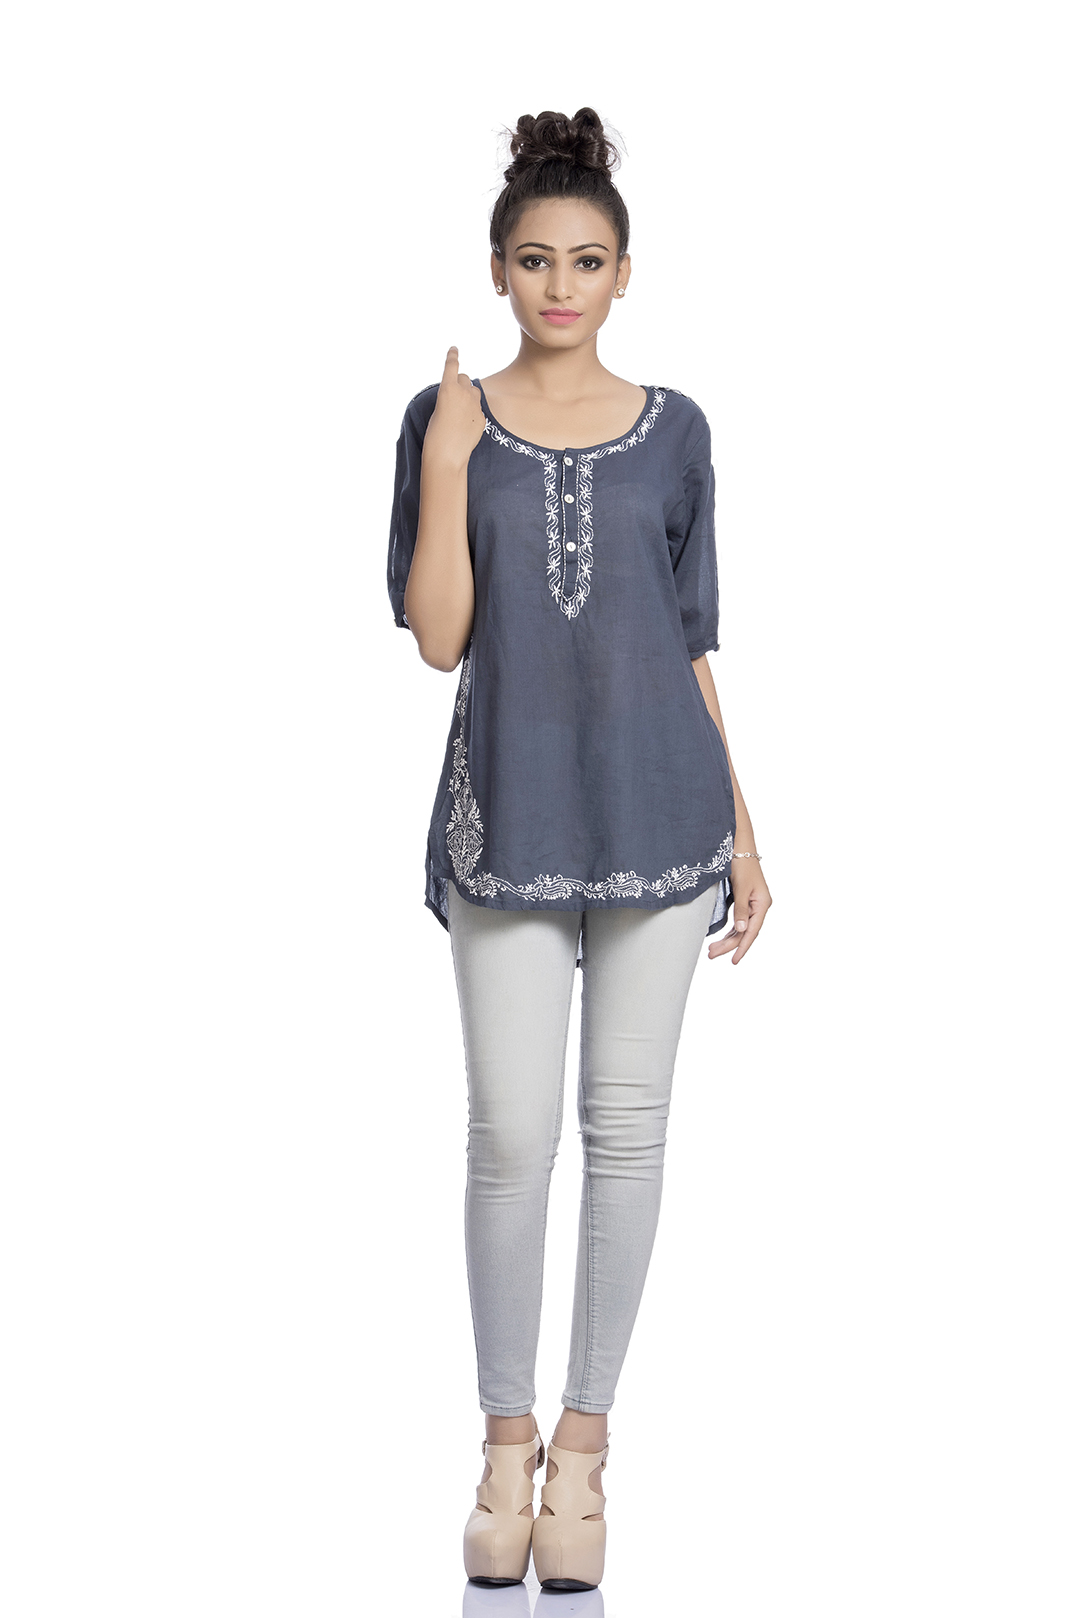 Navy blue round neck blouse | Ethnic and Beyond